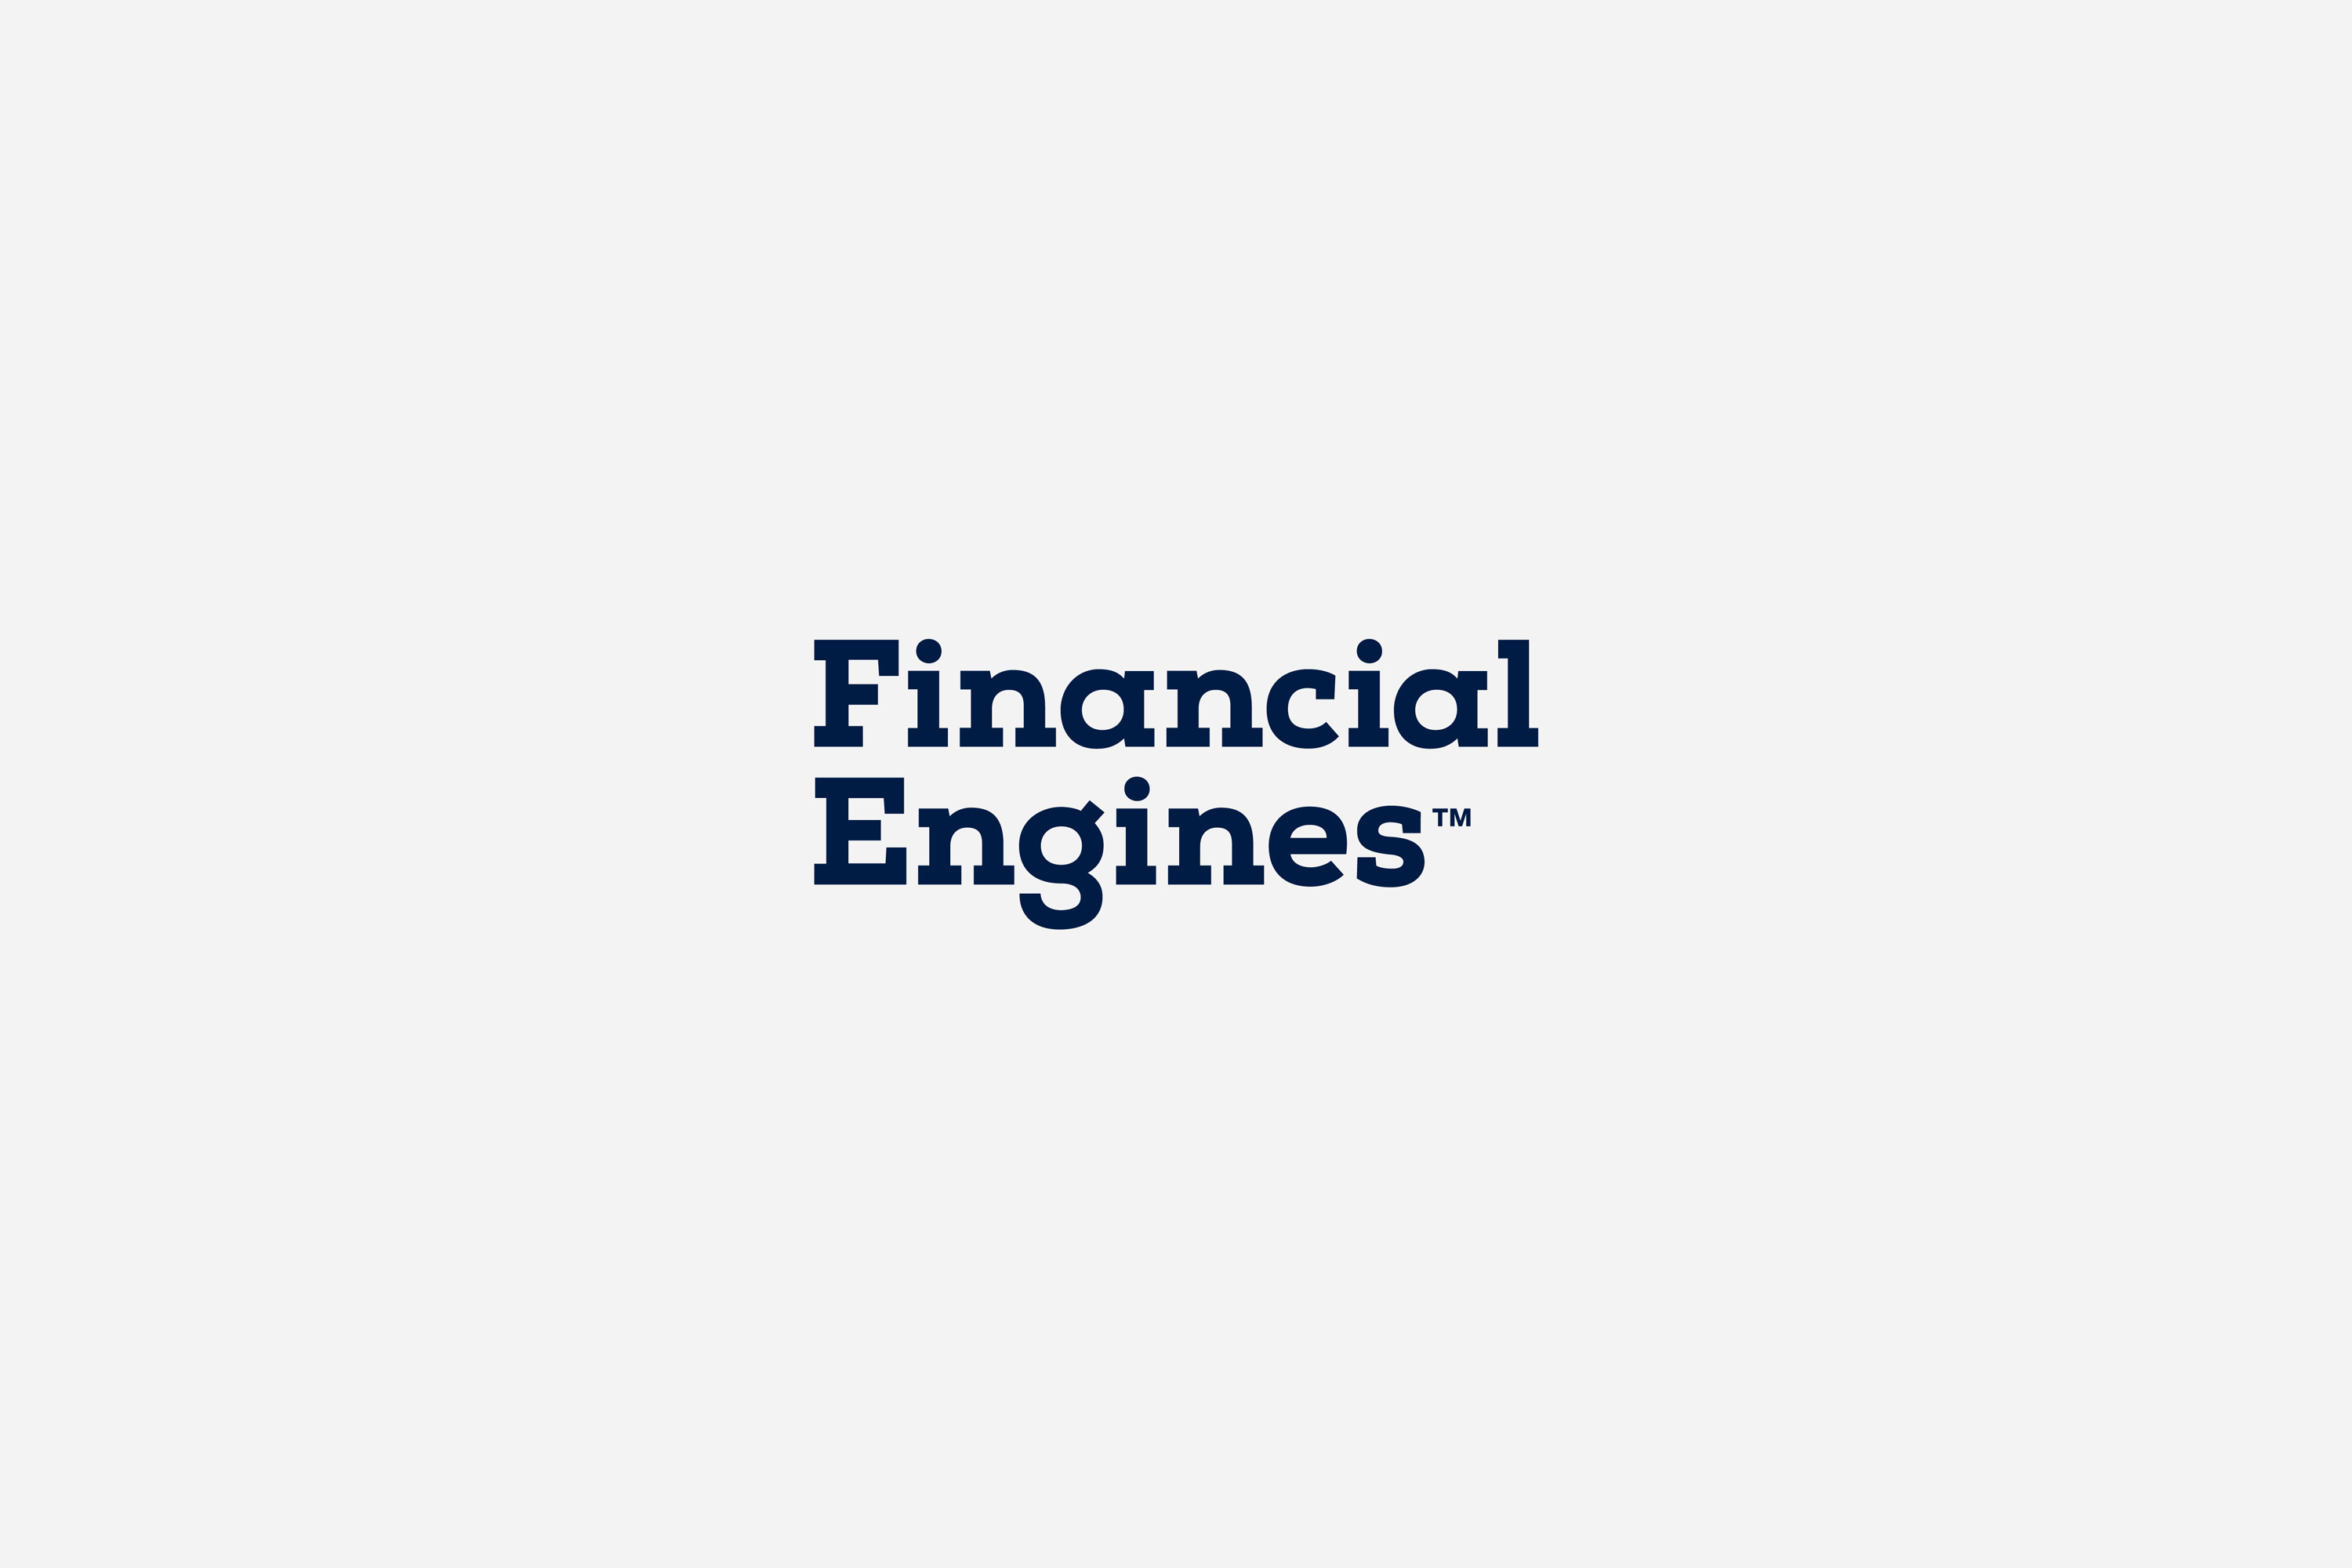 Financial_Engines_02